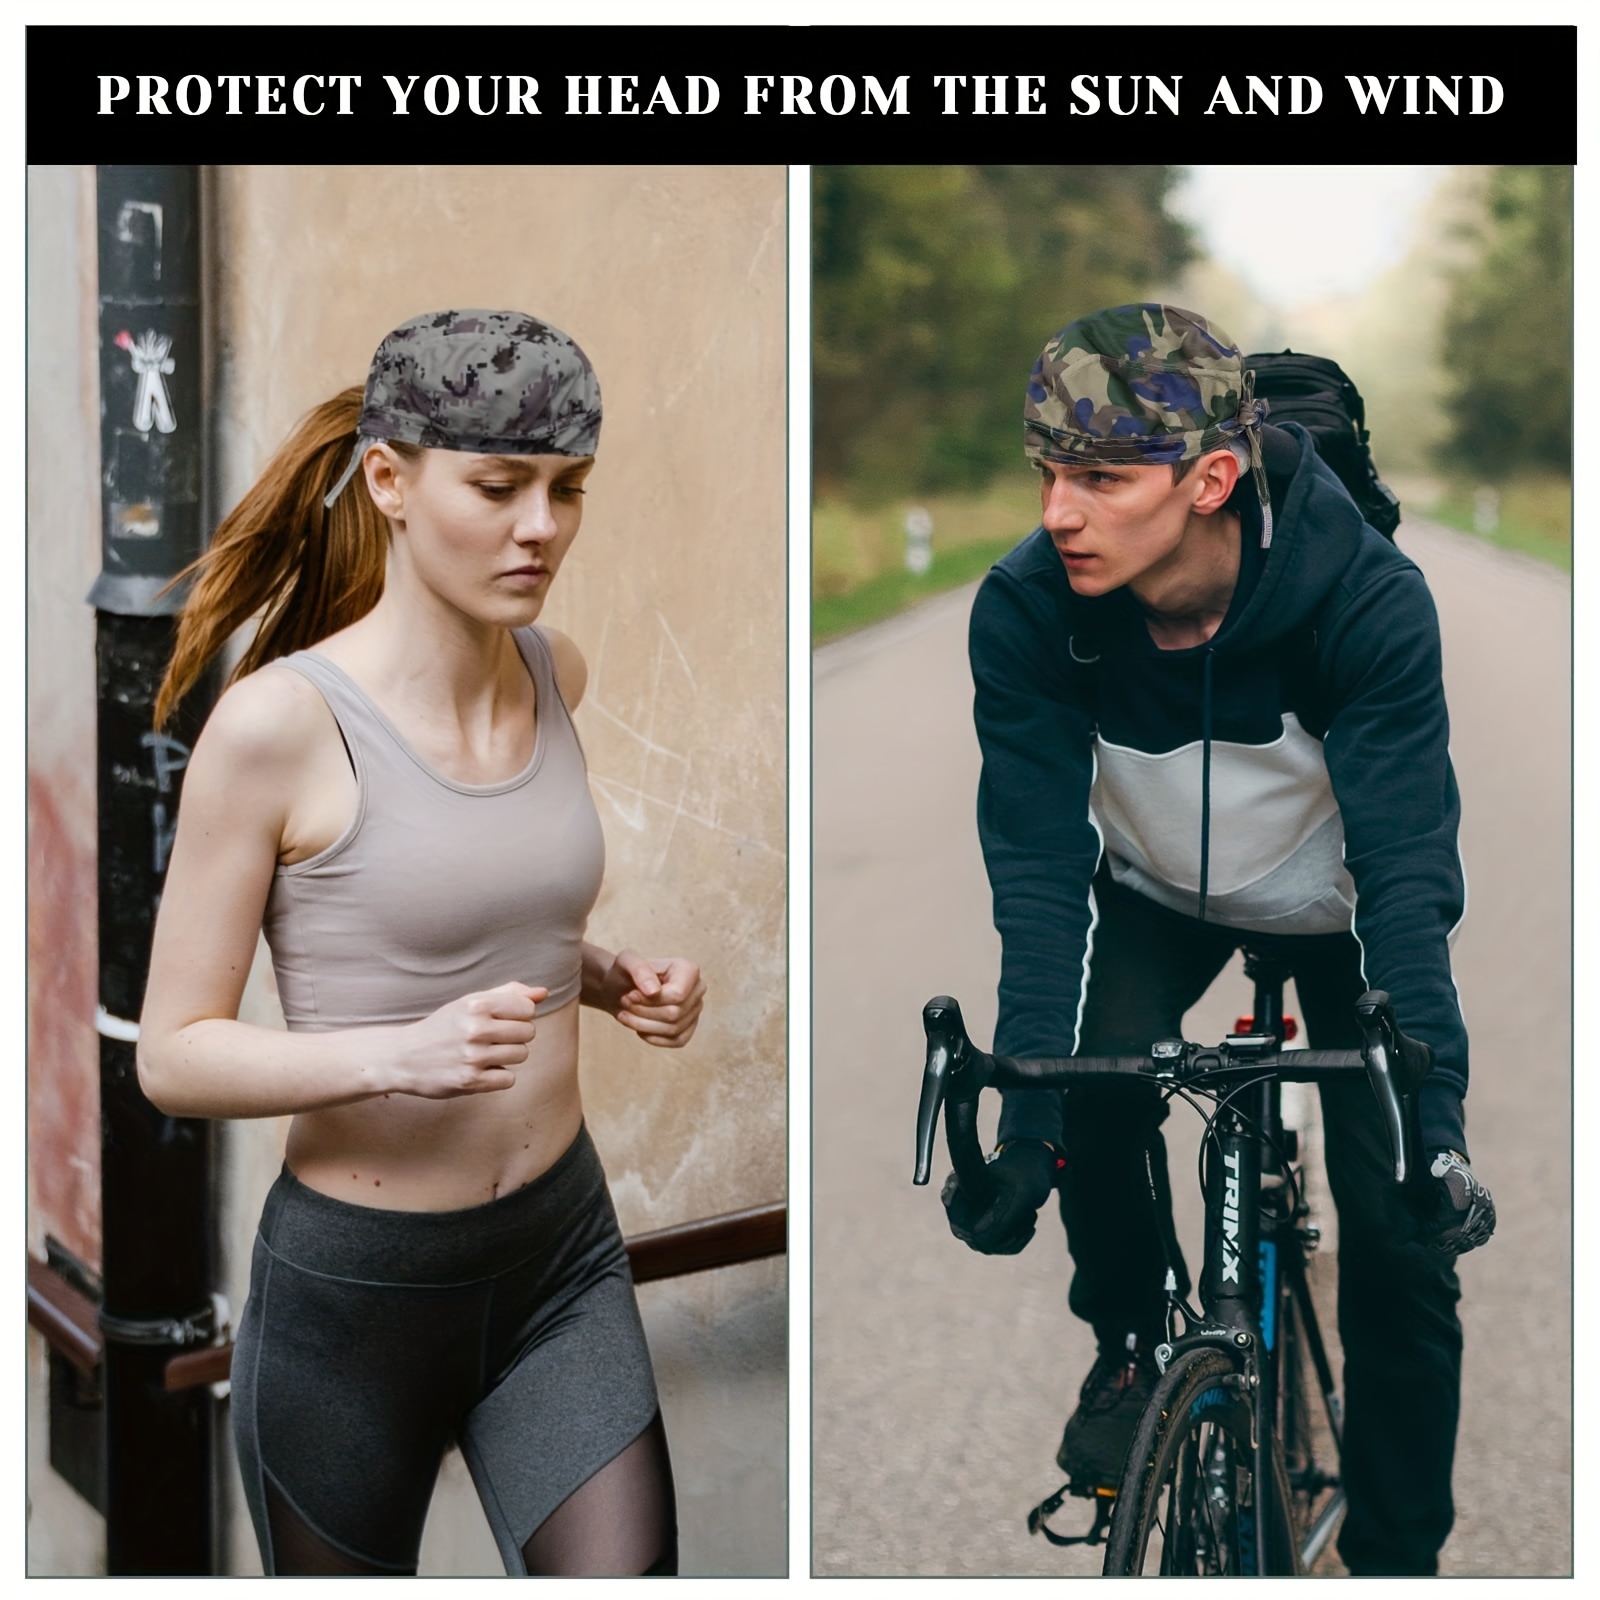 Neck Tube Scarf Cycling Bandana Moisture-wicking Quick-drying Breathable